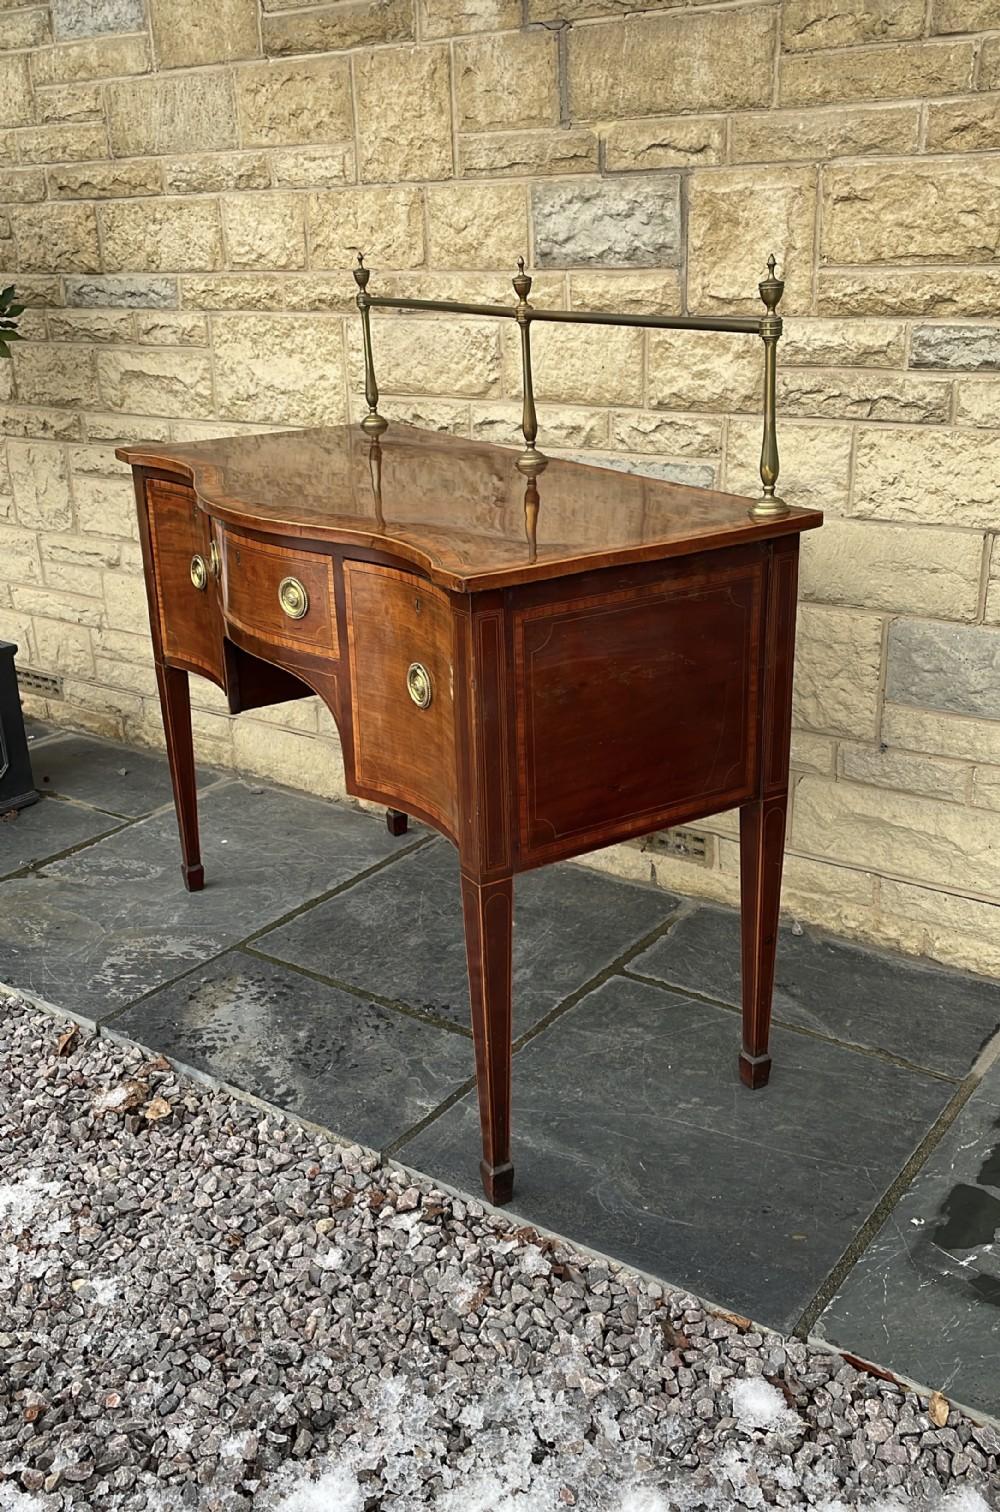  Early 19th C. English Inlaid Figured Mahogany Hepp. Style Serpentine Sideboard For Sale 8